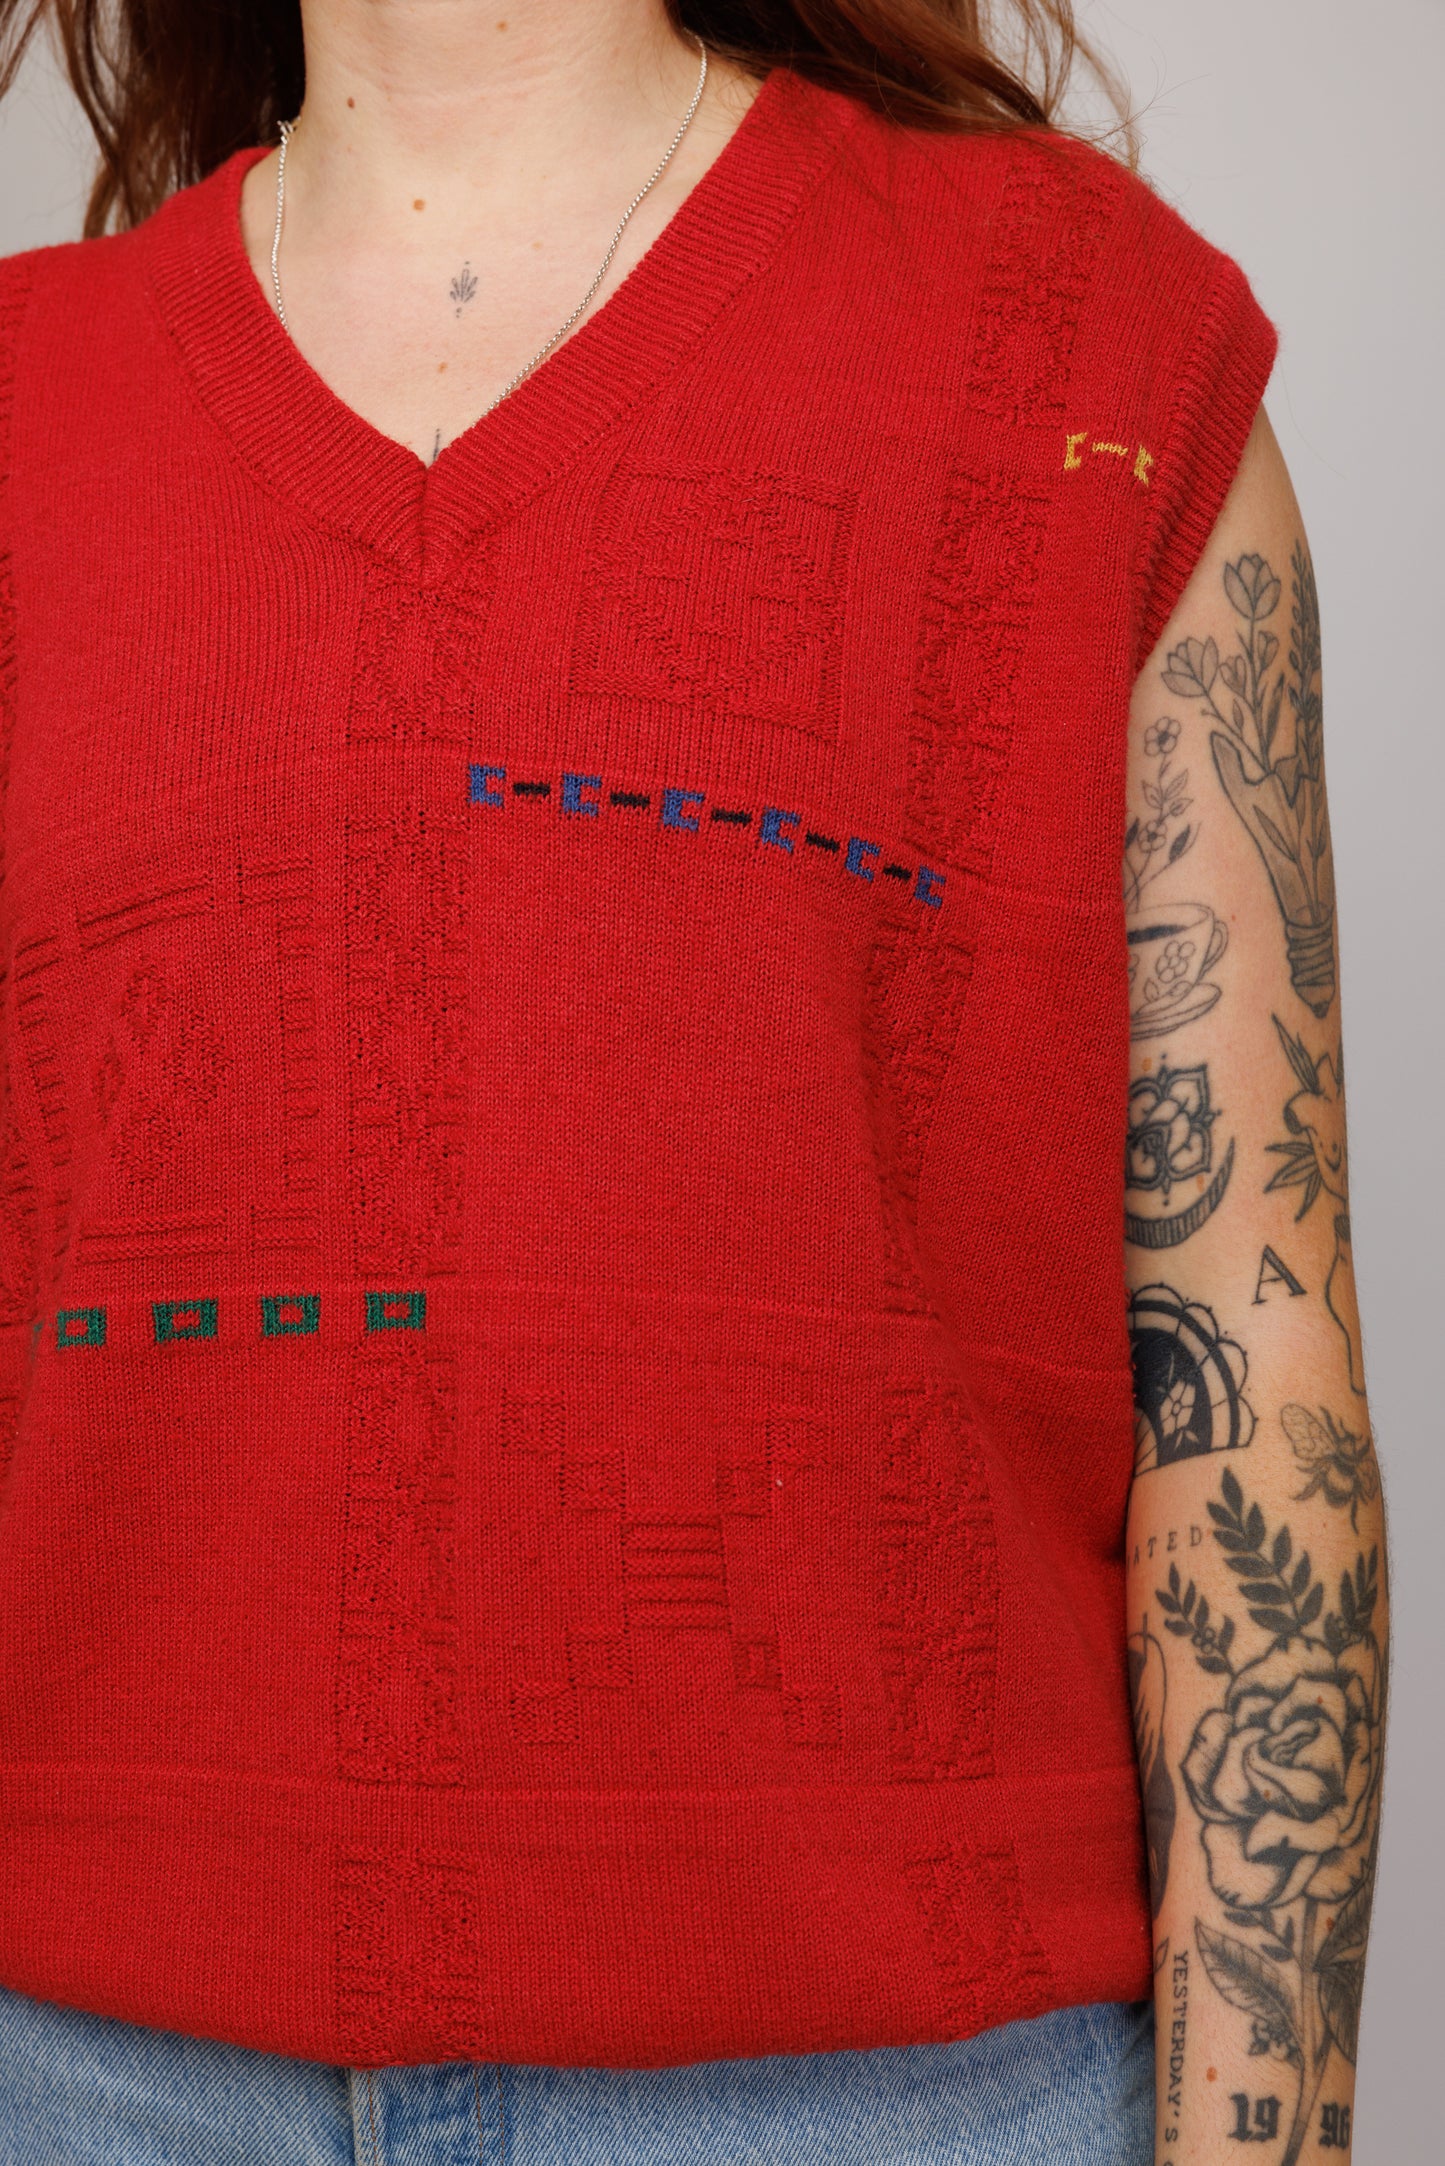 90's Red Textured Sweater Vest M/L